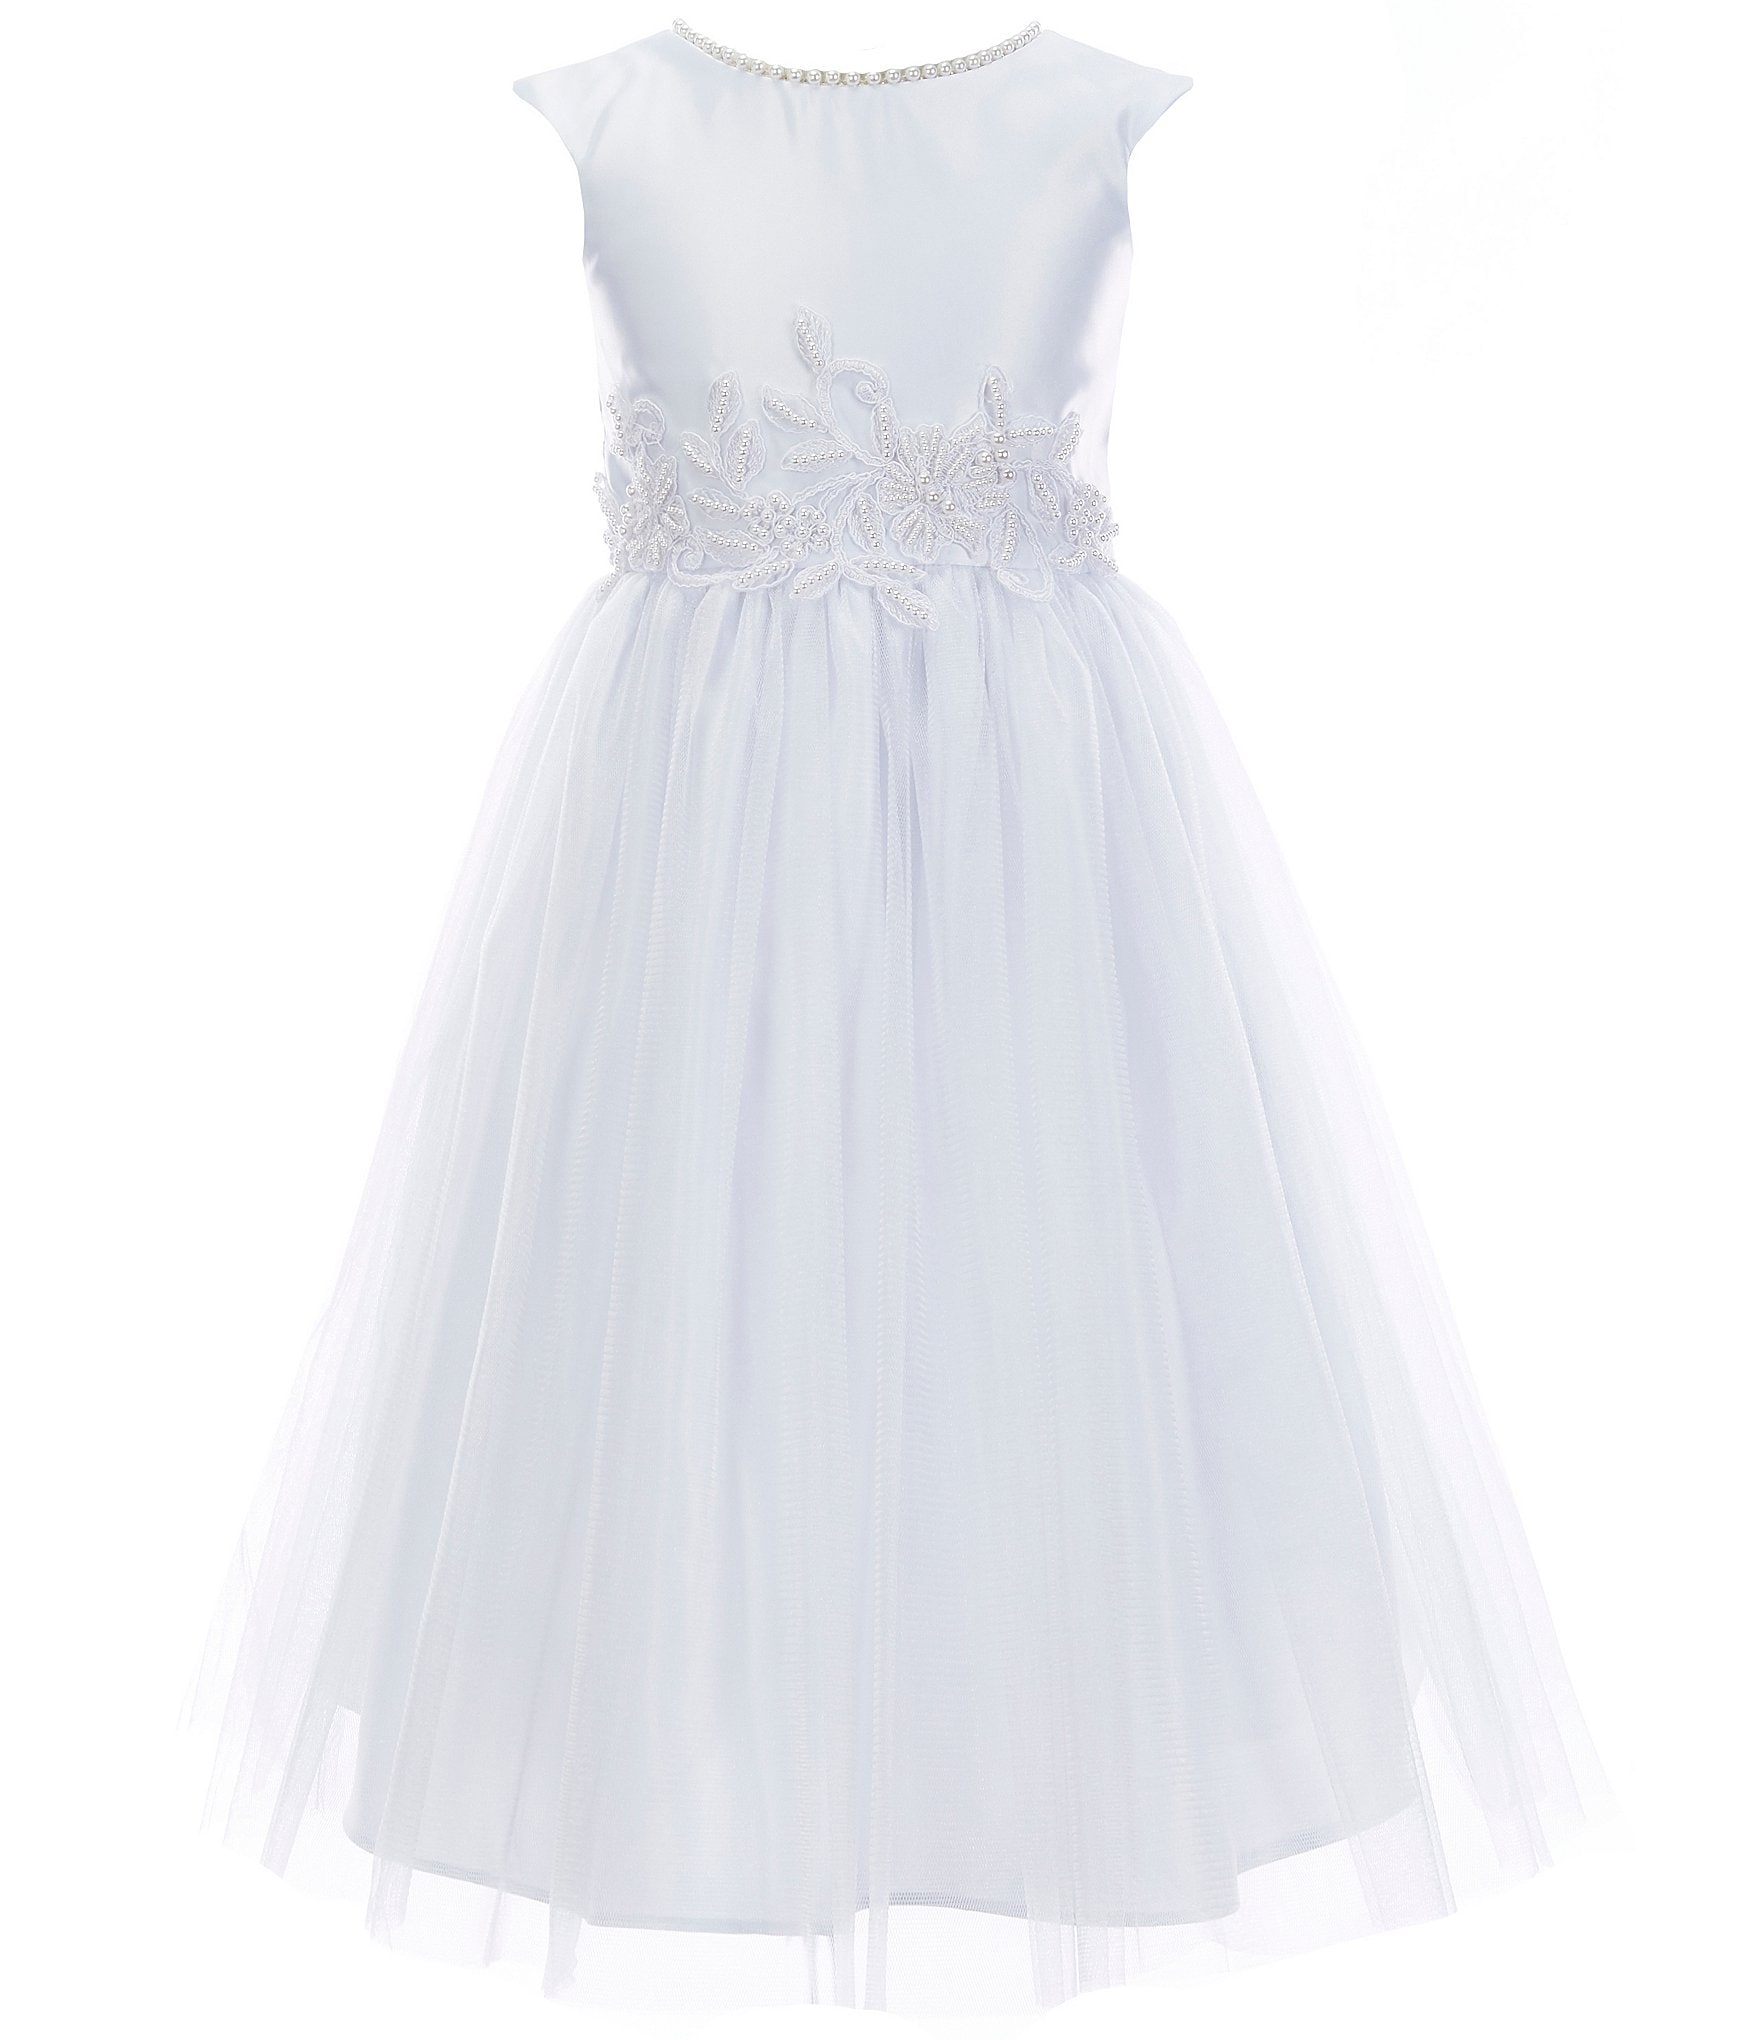 white dress for 6 years old girl